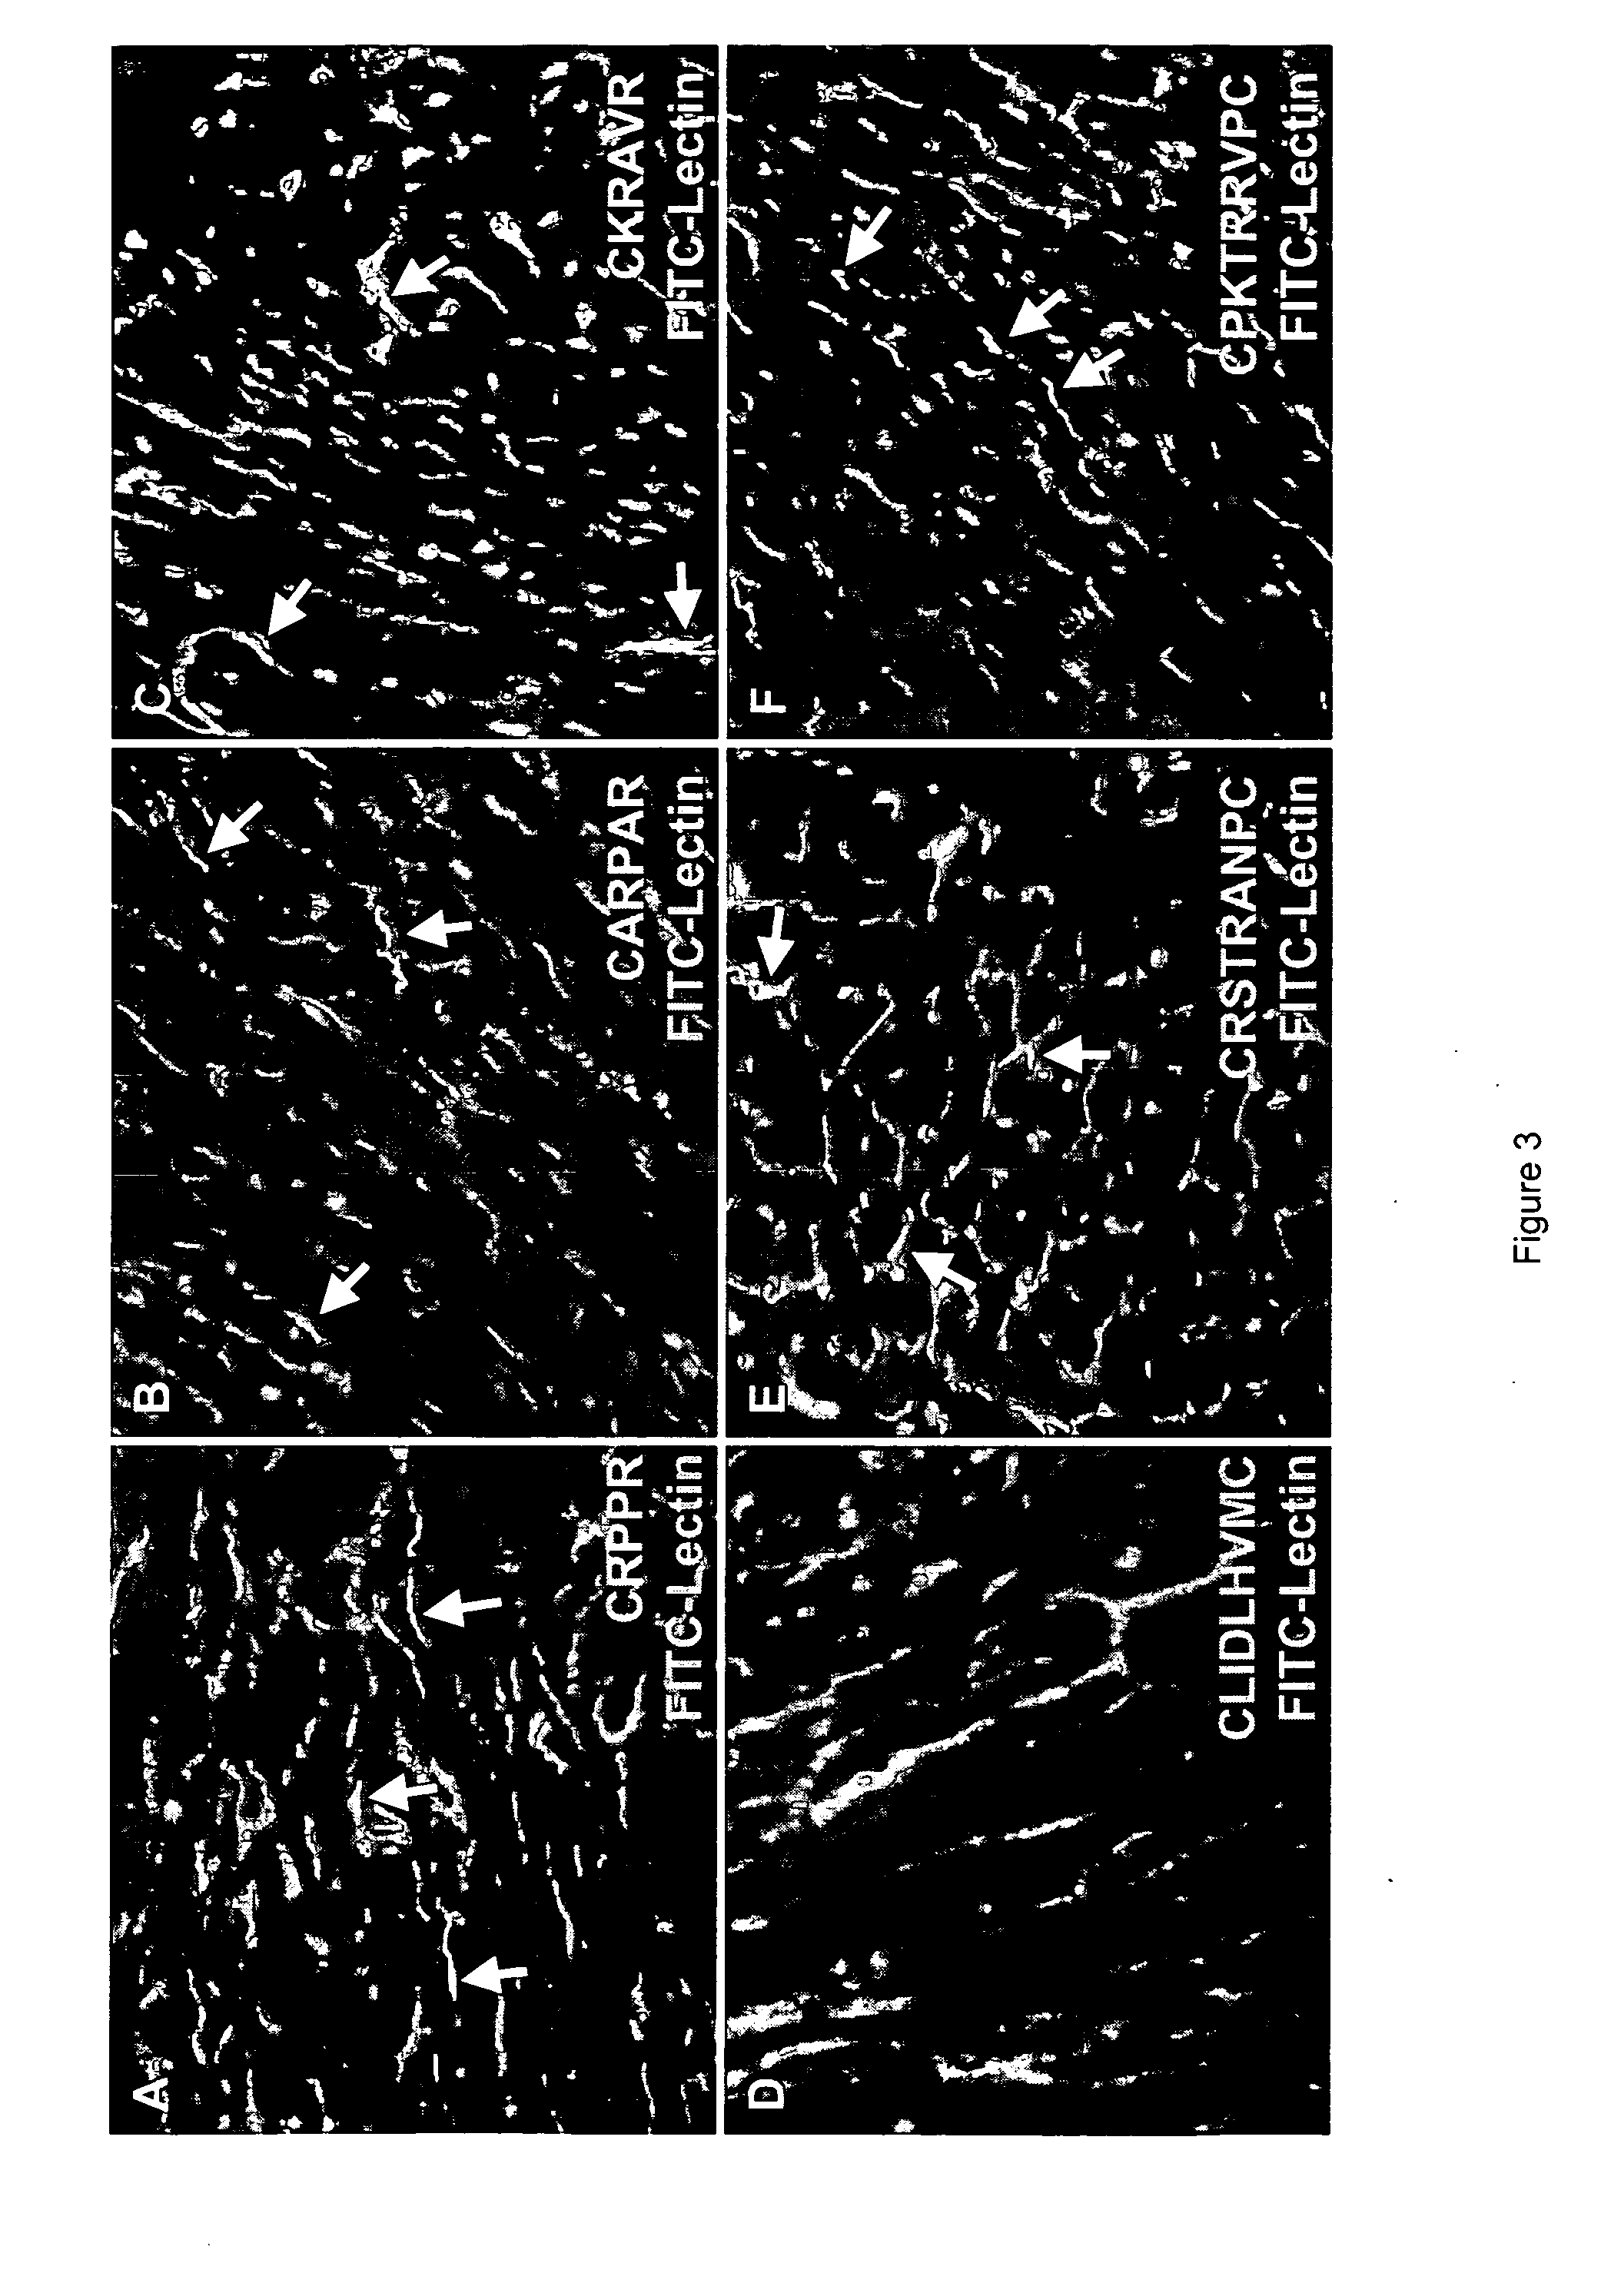 Peptides that selectively home to heart vasculature and related conjugates and methods